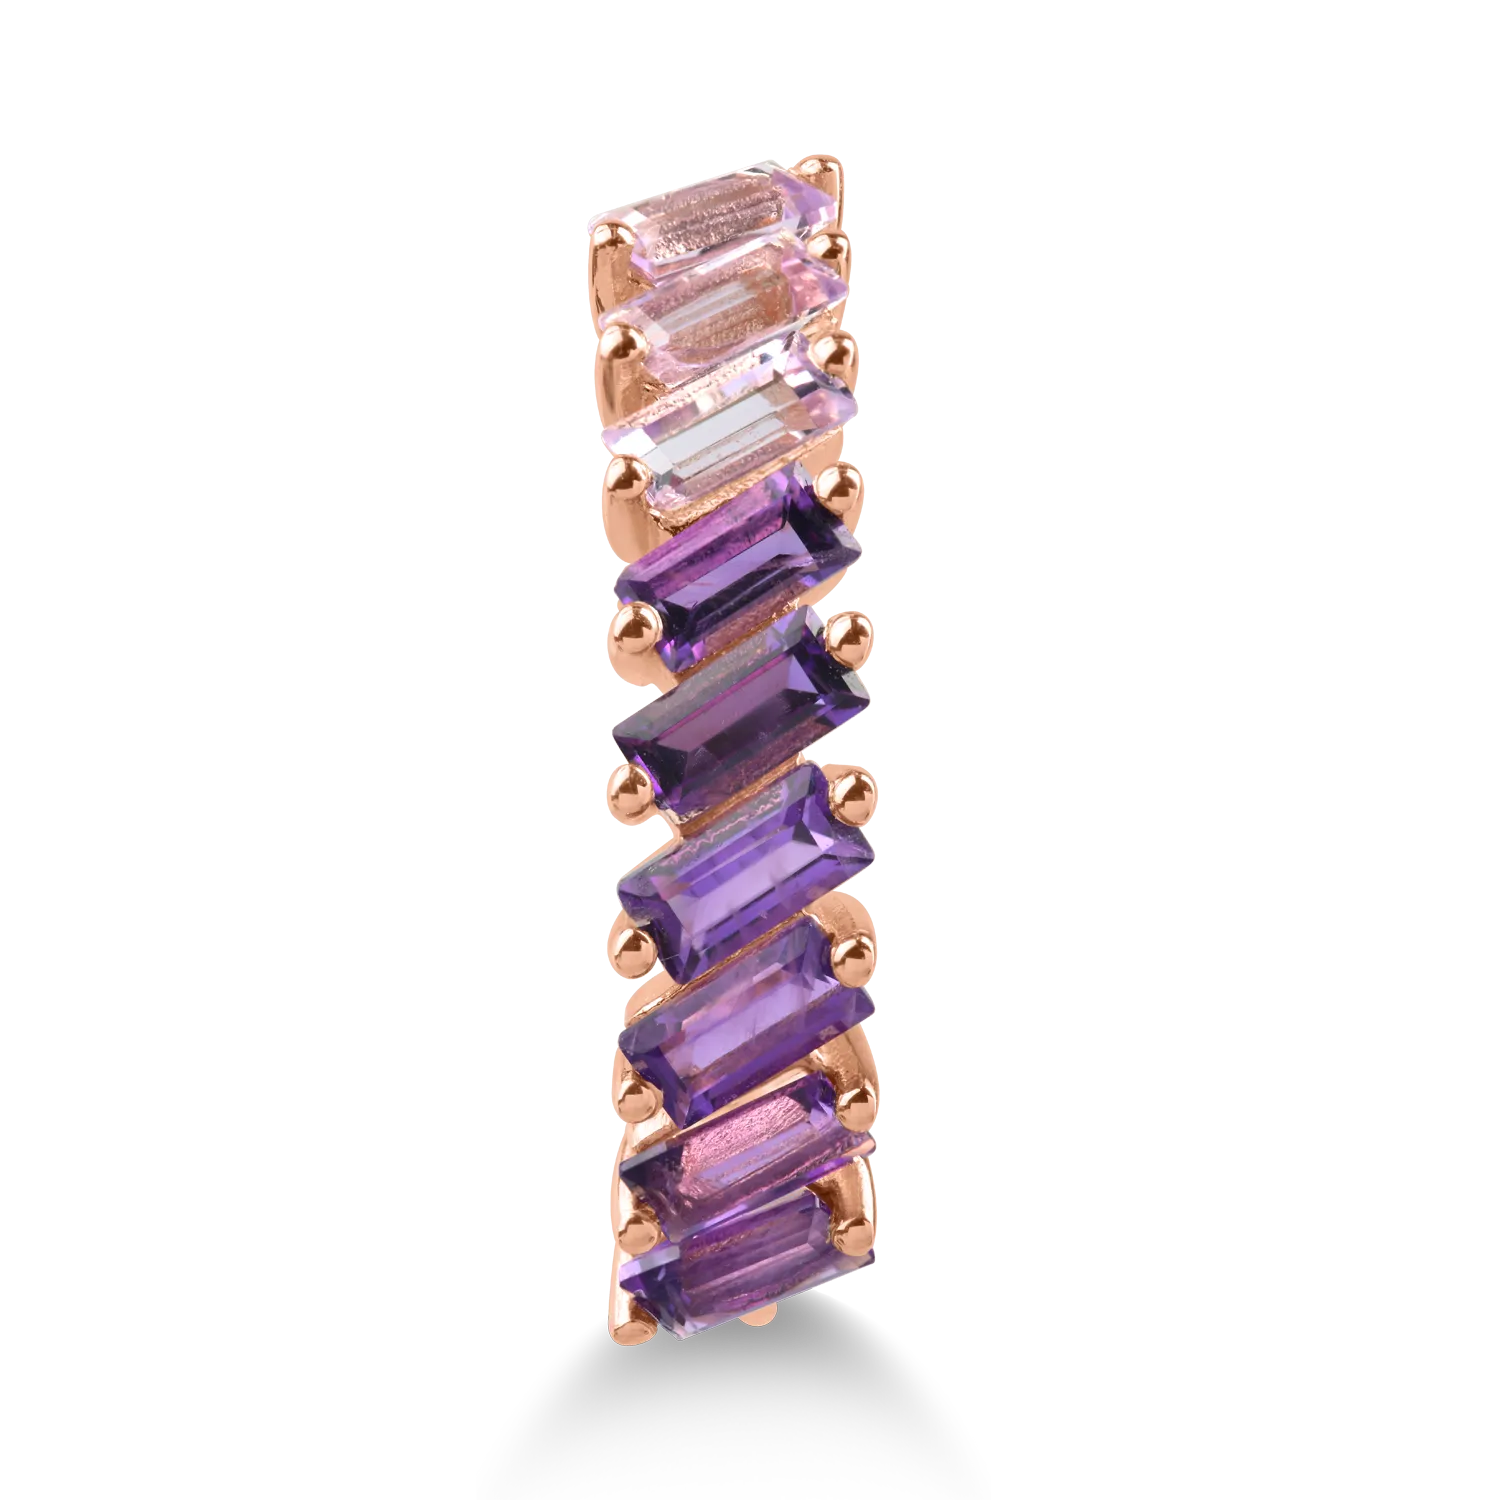 Rose gold ring with 0.944ct amethysts